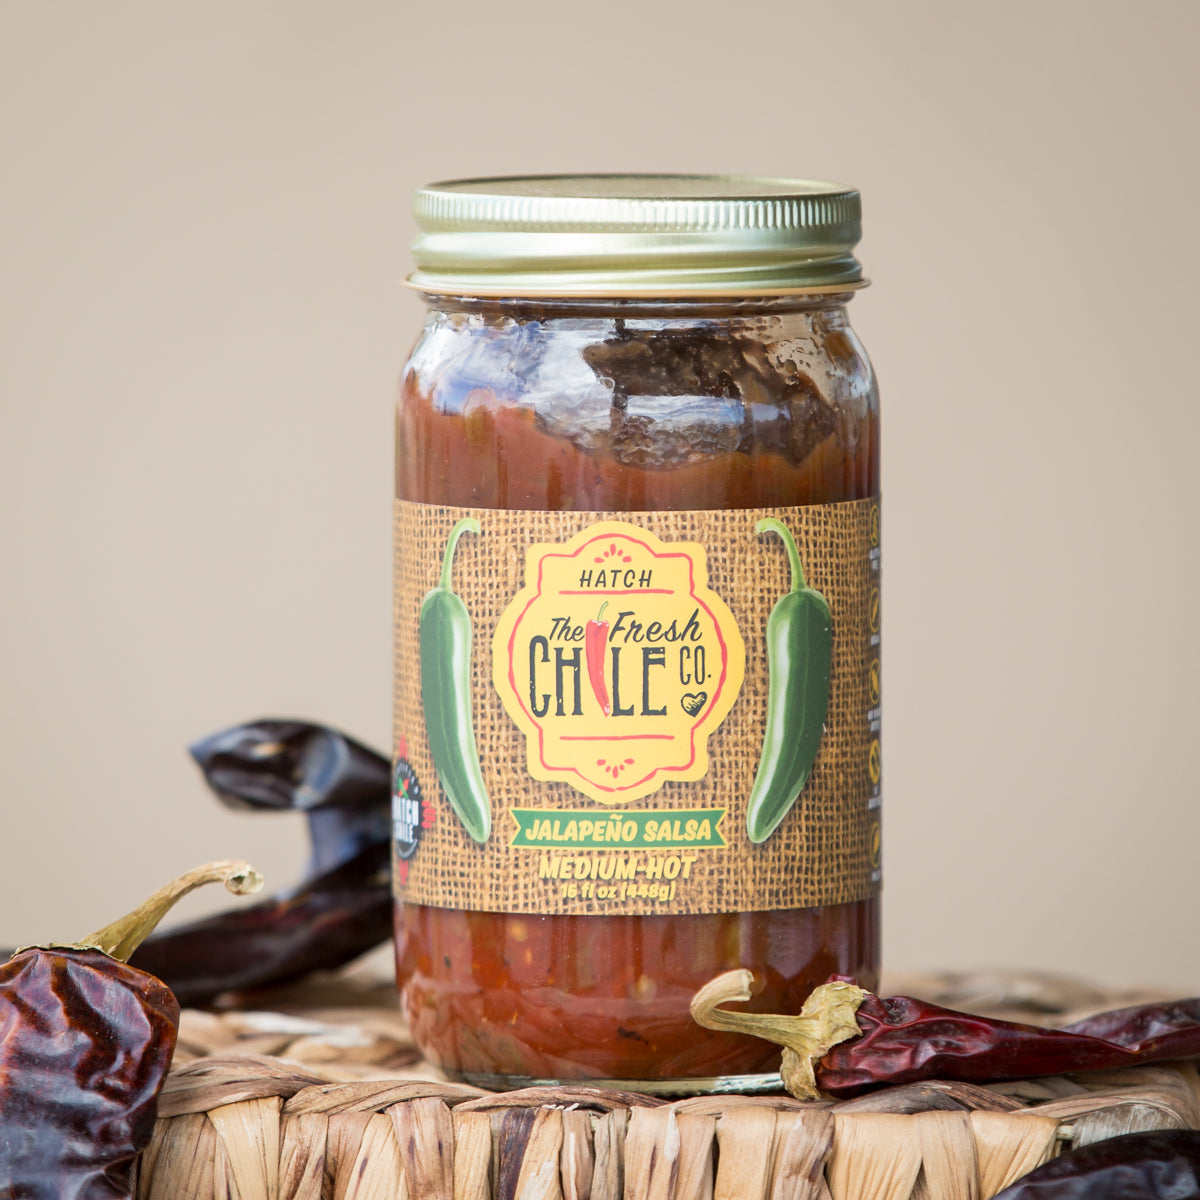 A jar of Hatch Jalapeño Salsa from The Fresh Chile Co. labeled "medium hot," recognized as a staple in New Mexican salsa, surrounded by dried chile peppers, on a woven basket against a neutral background.